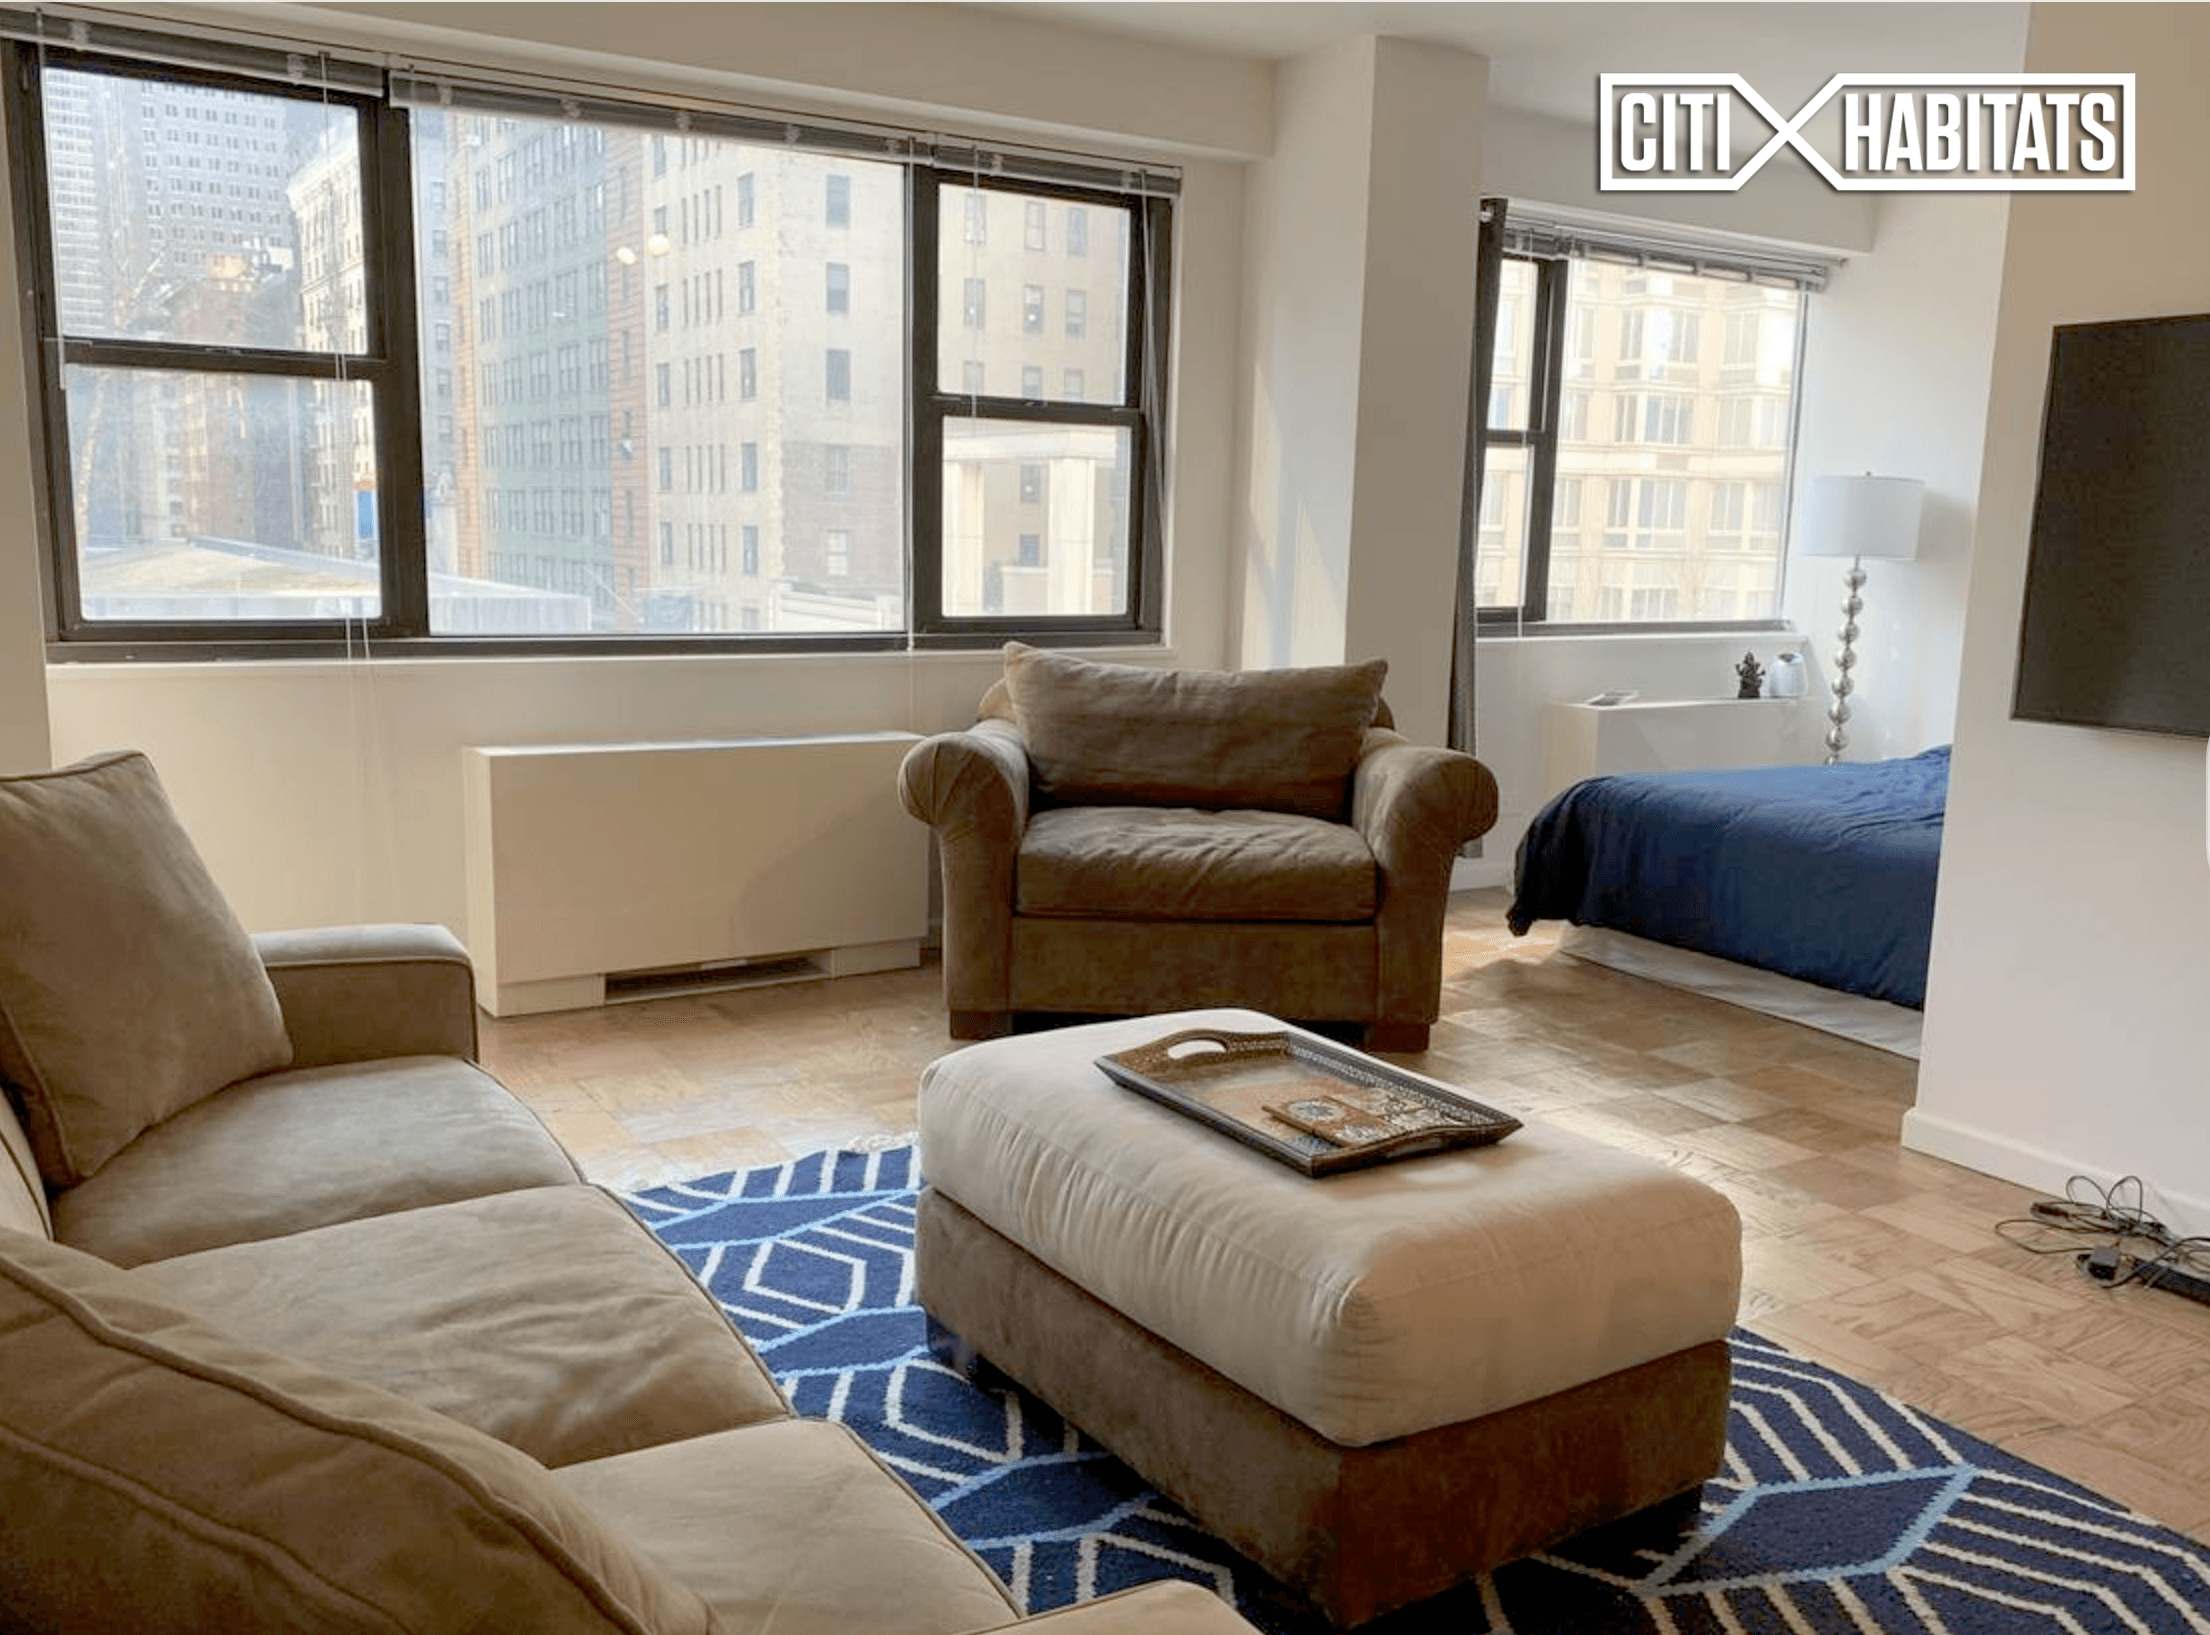 Fully furnished spacious and renovated alcove studio, centrally located in a Midtown West Columbus Circle doorman building.